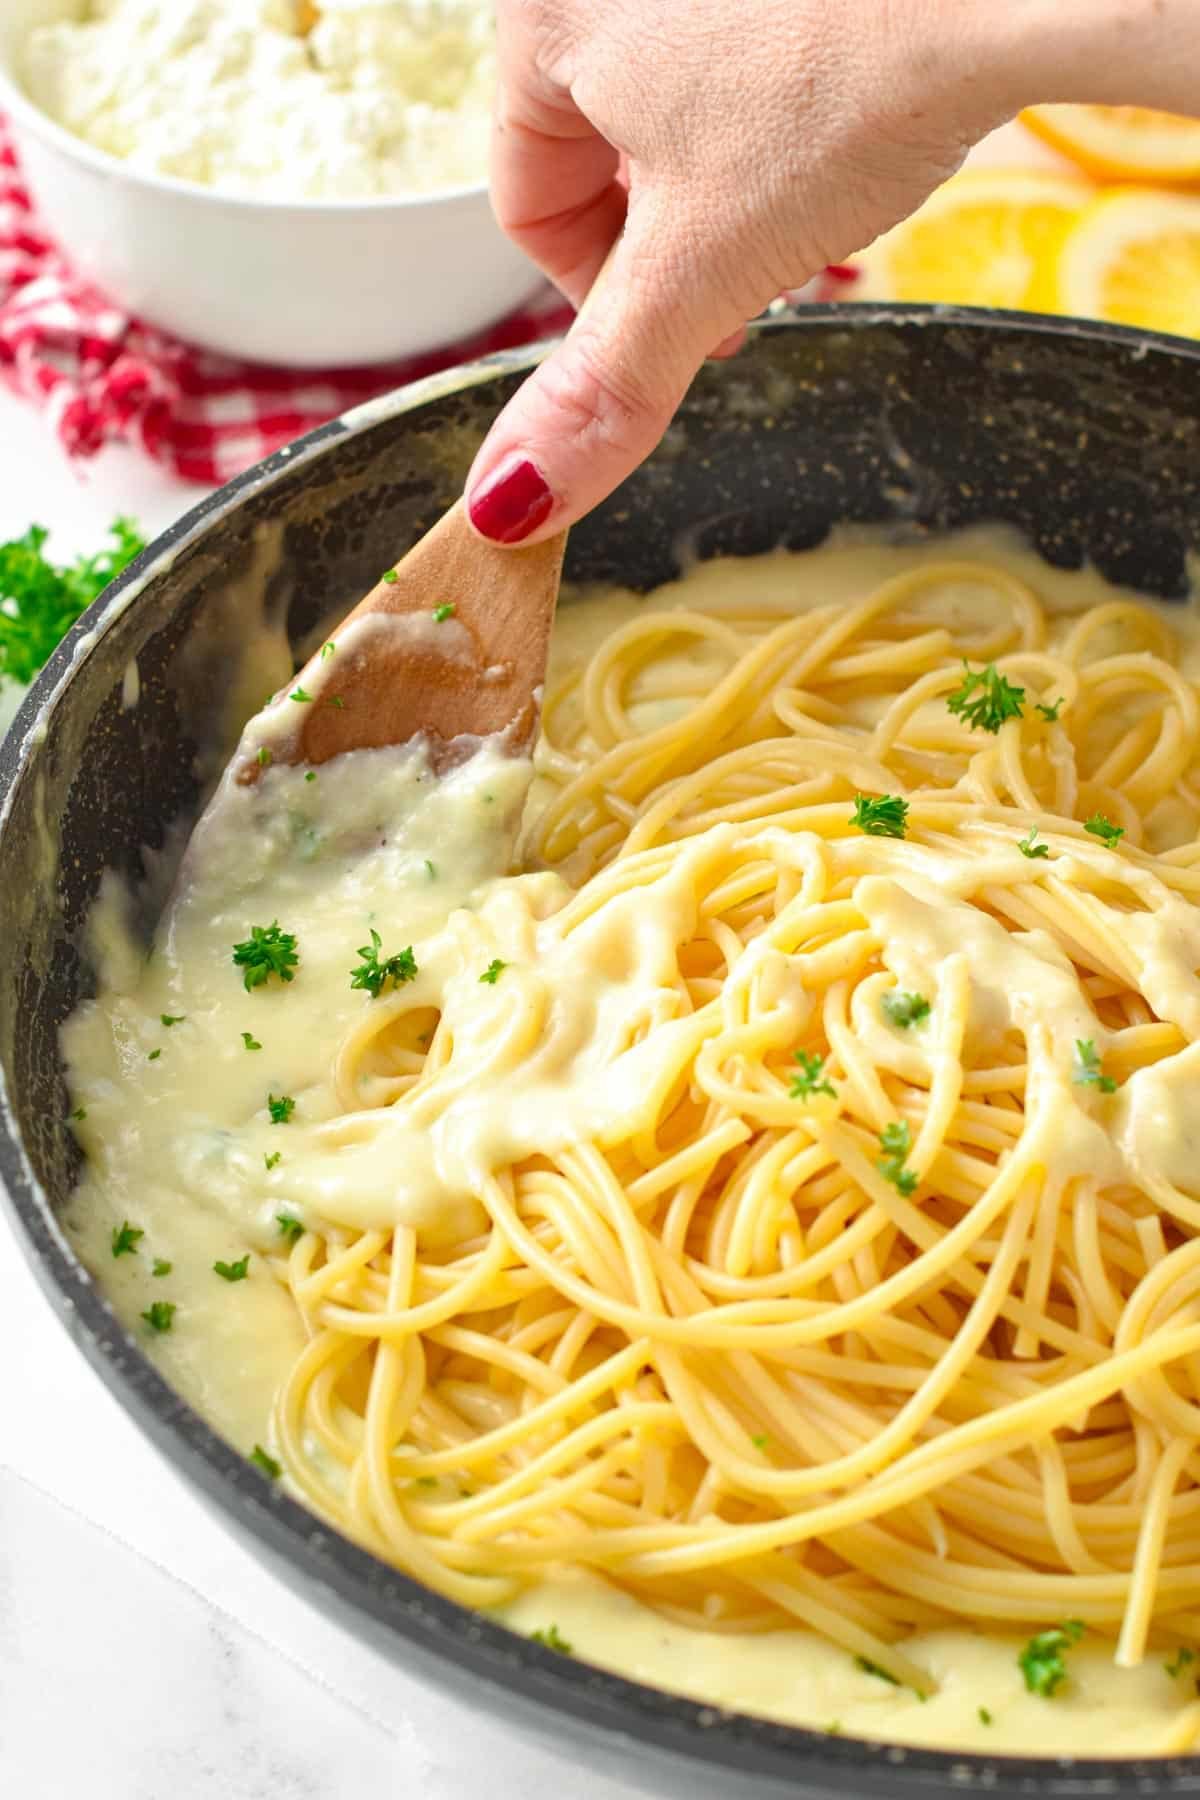 This Cottage Cheese Pasta Sauce is the most delicious creamy protein pasta sauce packed with 17 g of proteins per serve. If you love Alfredo sauce, this healthier version hit the spot.This Cottage Cheese Pasta Sauce is the most delicious creamy protein pasta sauce packed with 17 g of proteins per serve. If you love Alfredo sauce, this healthier version hit the spot.